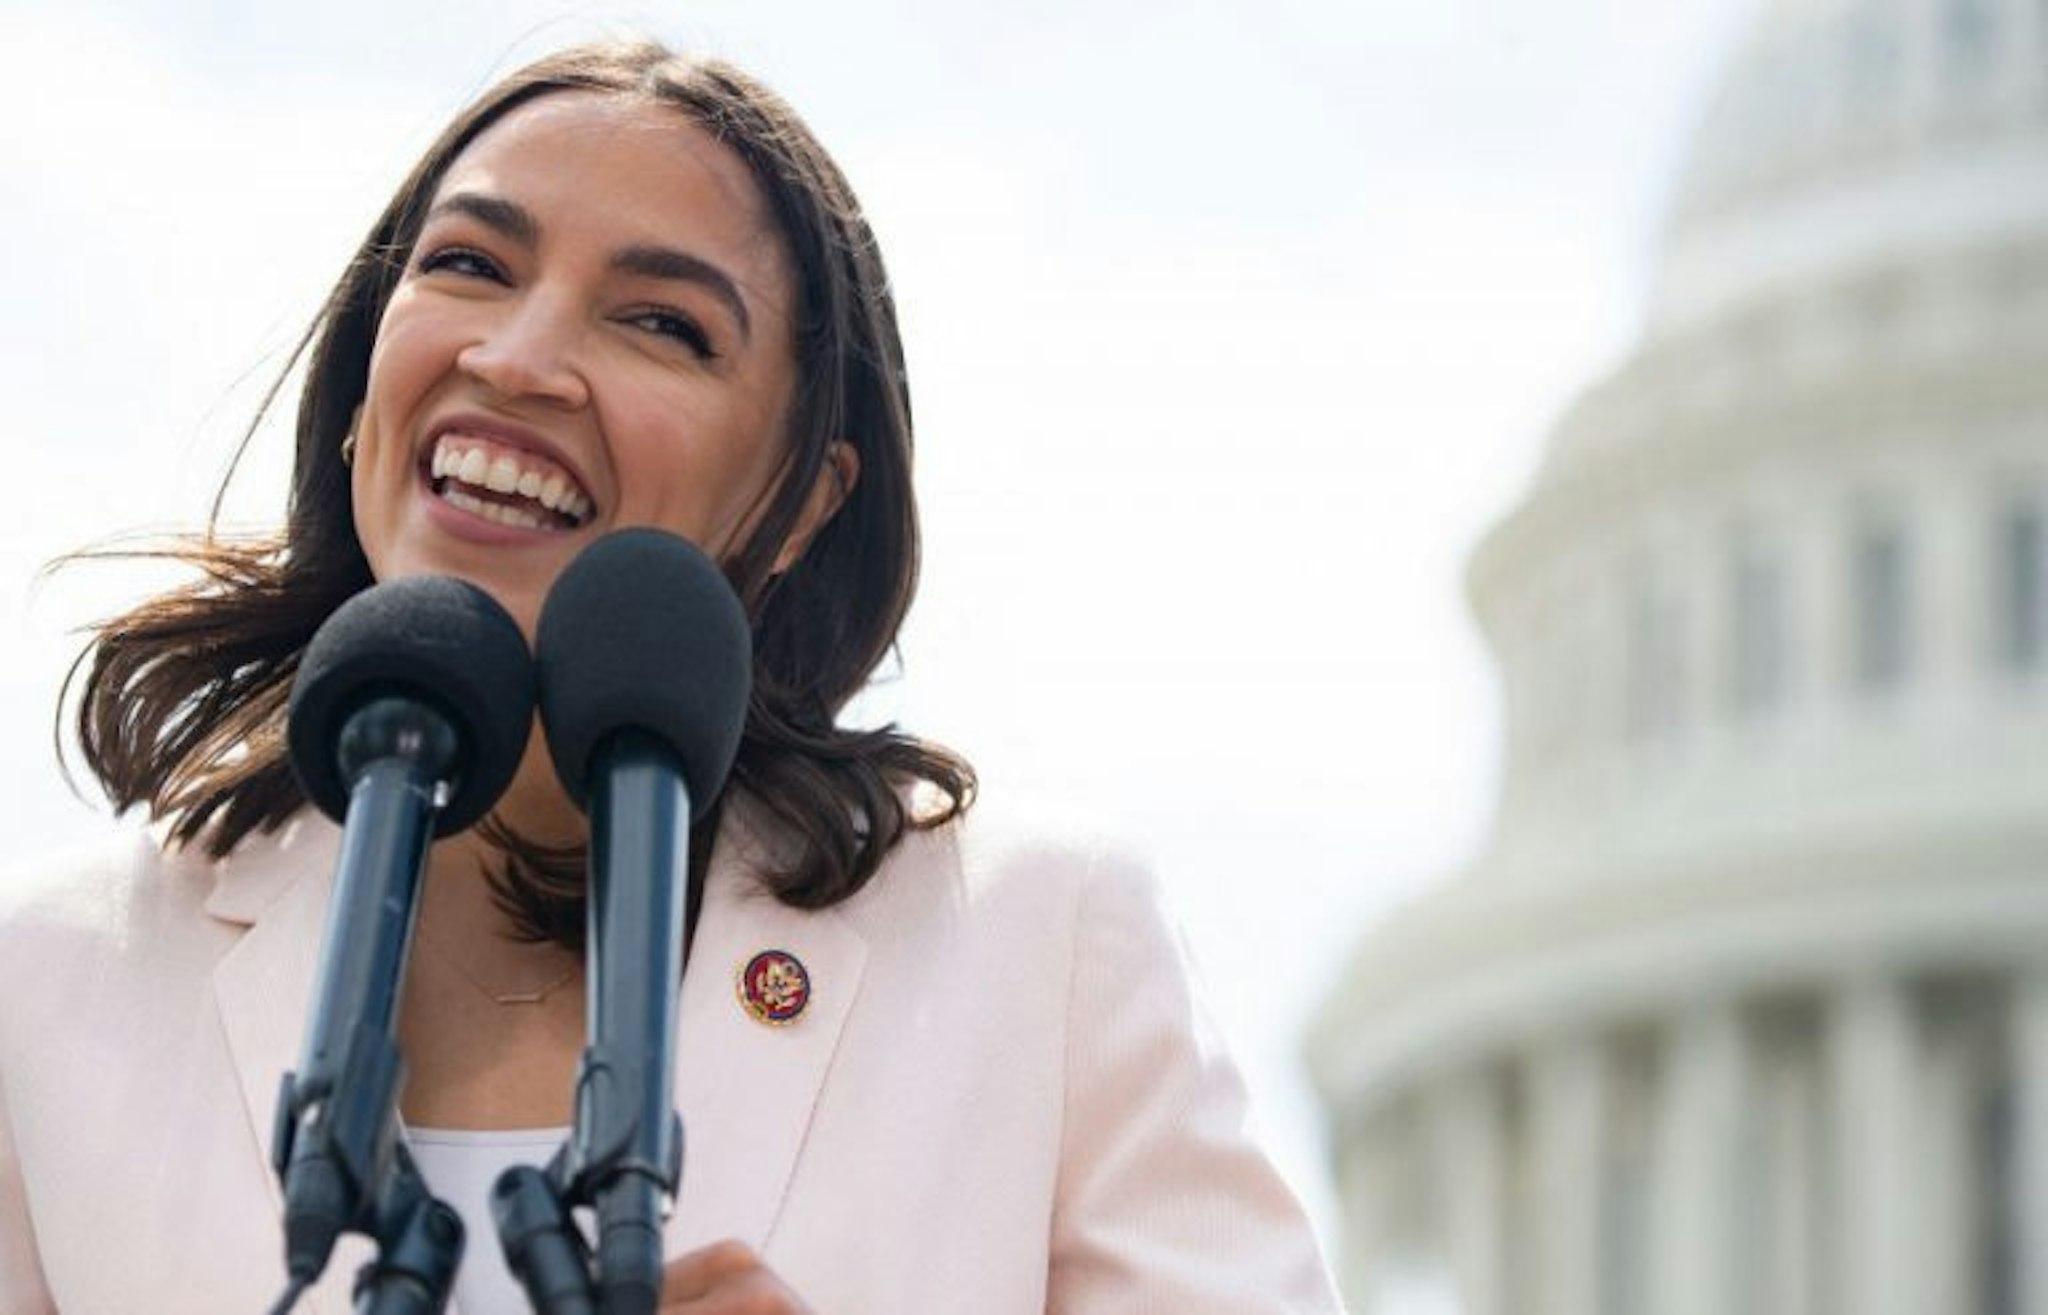 US Representative Alexandria Ocasio-Cortez, Democrat of New York, attends a press conference about a postal banking pilot program outside the US Capitol in Washington, DC, April 15, 2021. (SAUL LOEB/AFP via Getty Images)